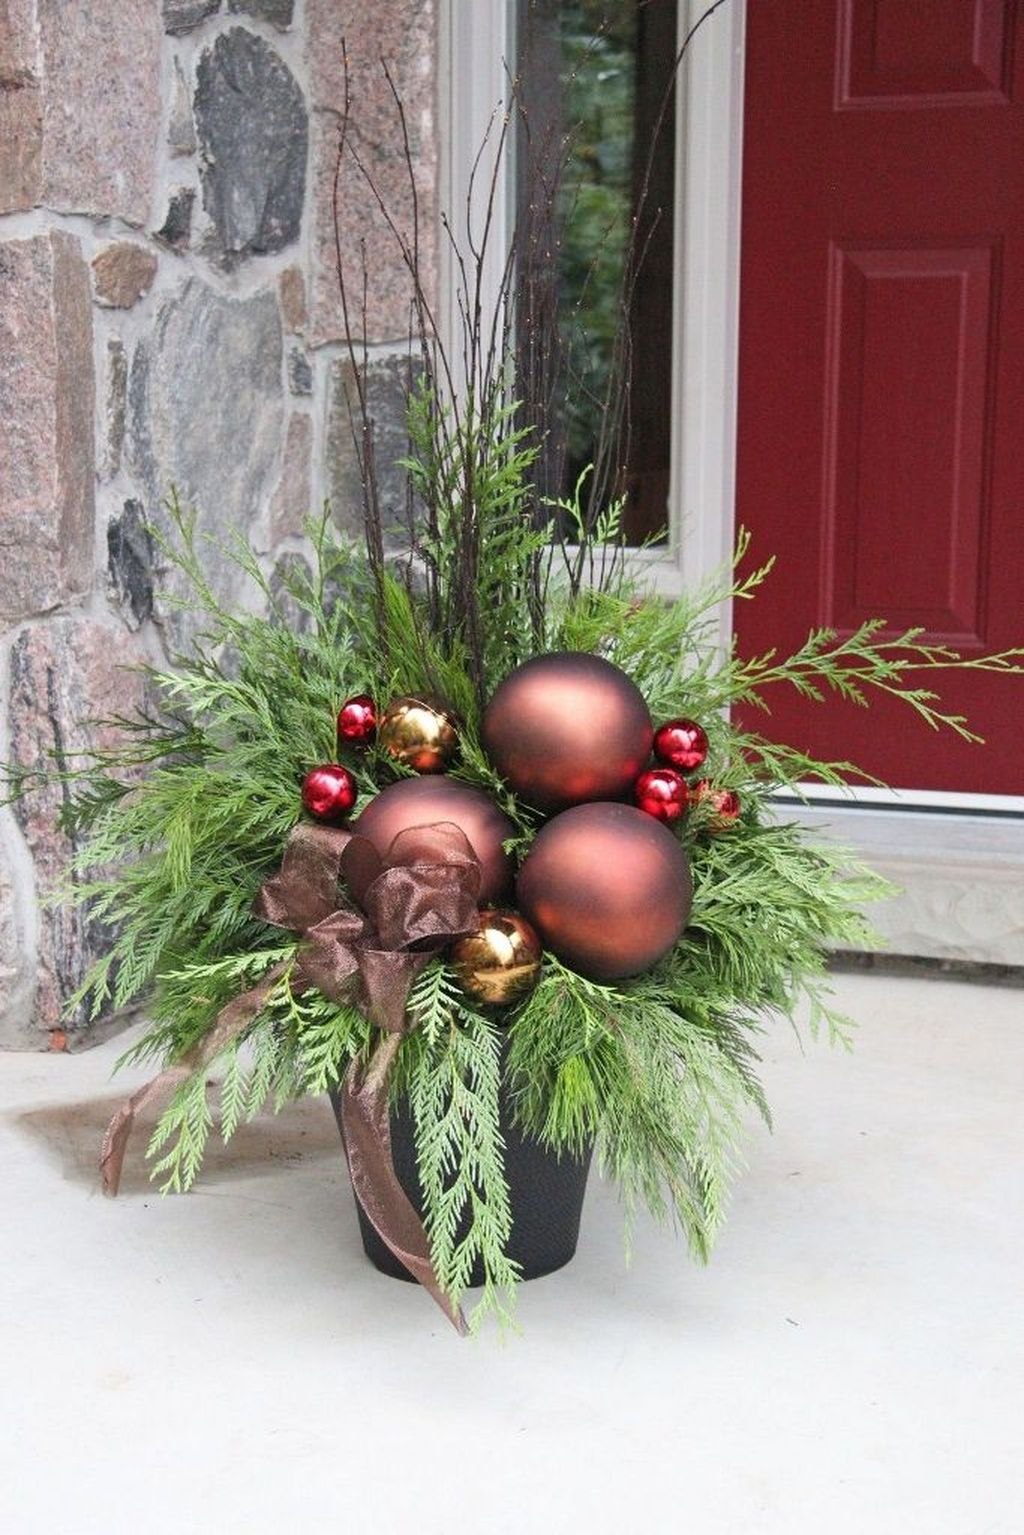 Marvelous Outdoor Holiday Planter Ideas To Beauty Porch Décor 18